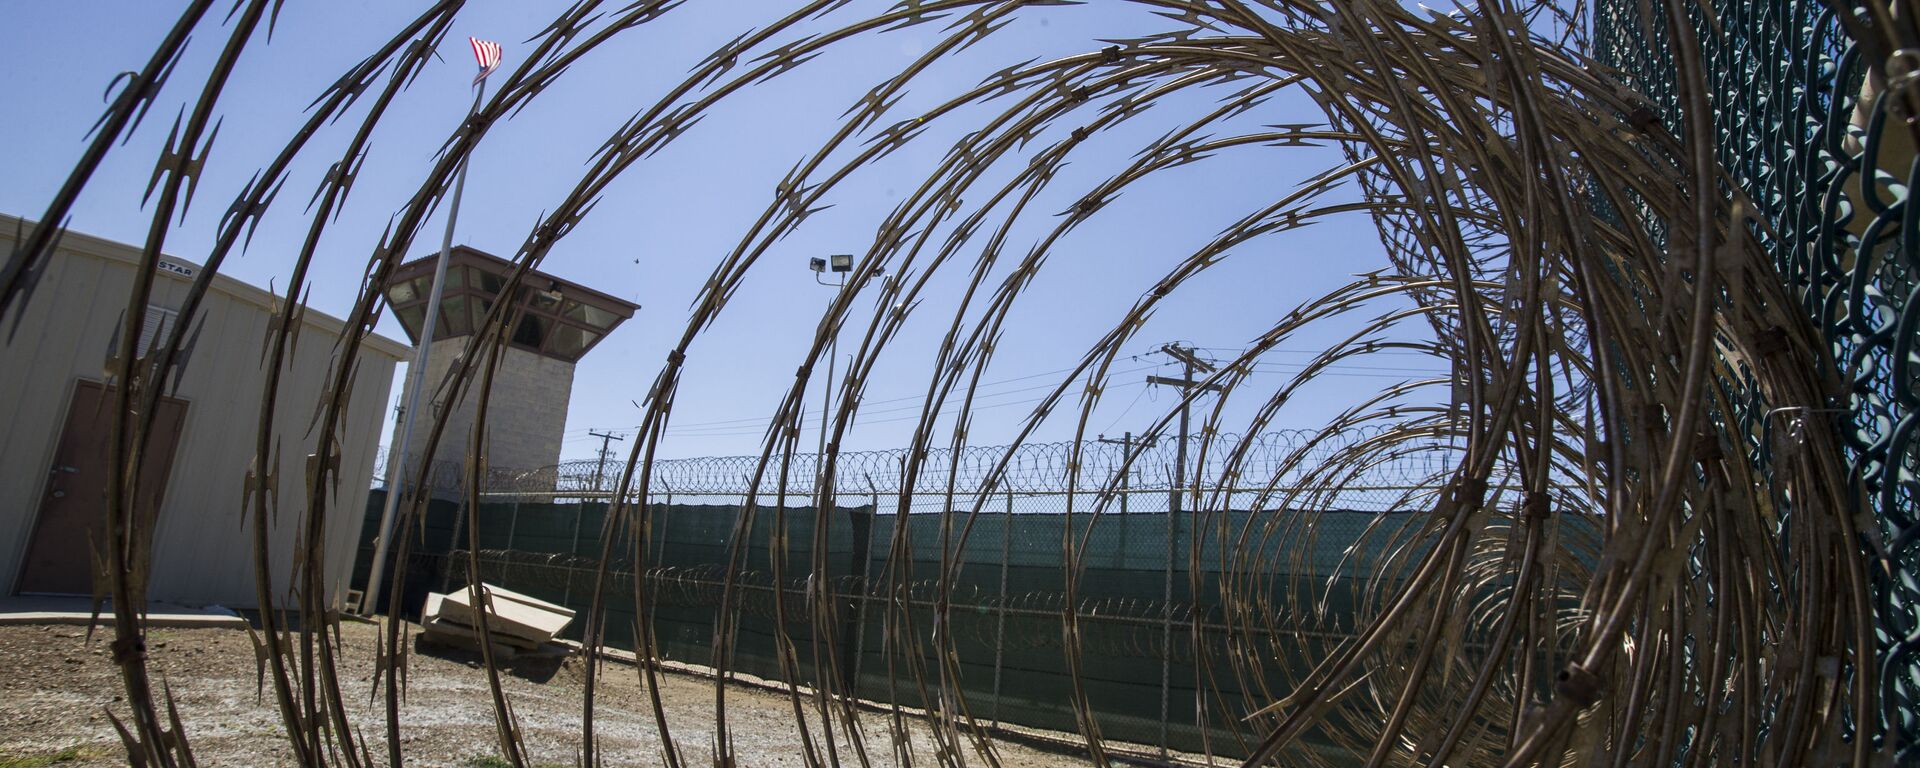 In this Wednesday, April 17, 2019 file photo reviewed by U.S. military officials, the control tower is seen through the razor wire inside the Camp VI detention facility in Guantanamo Bay Naval Base, Cuba. - Sputnik International, 1920